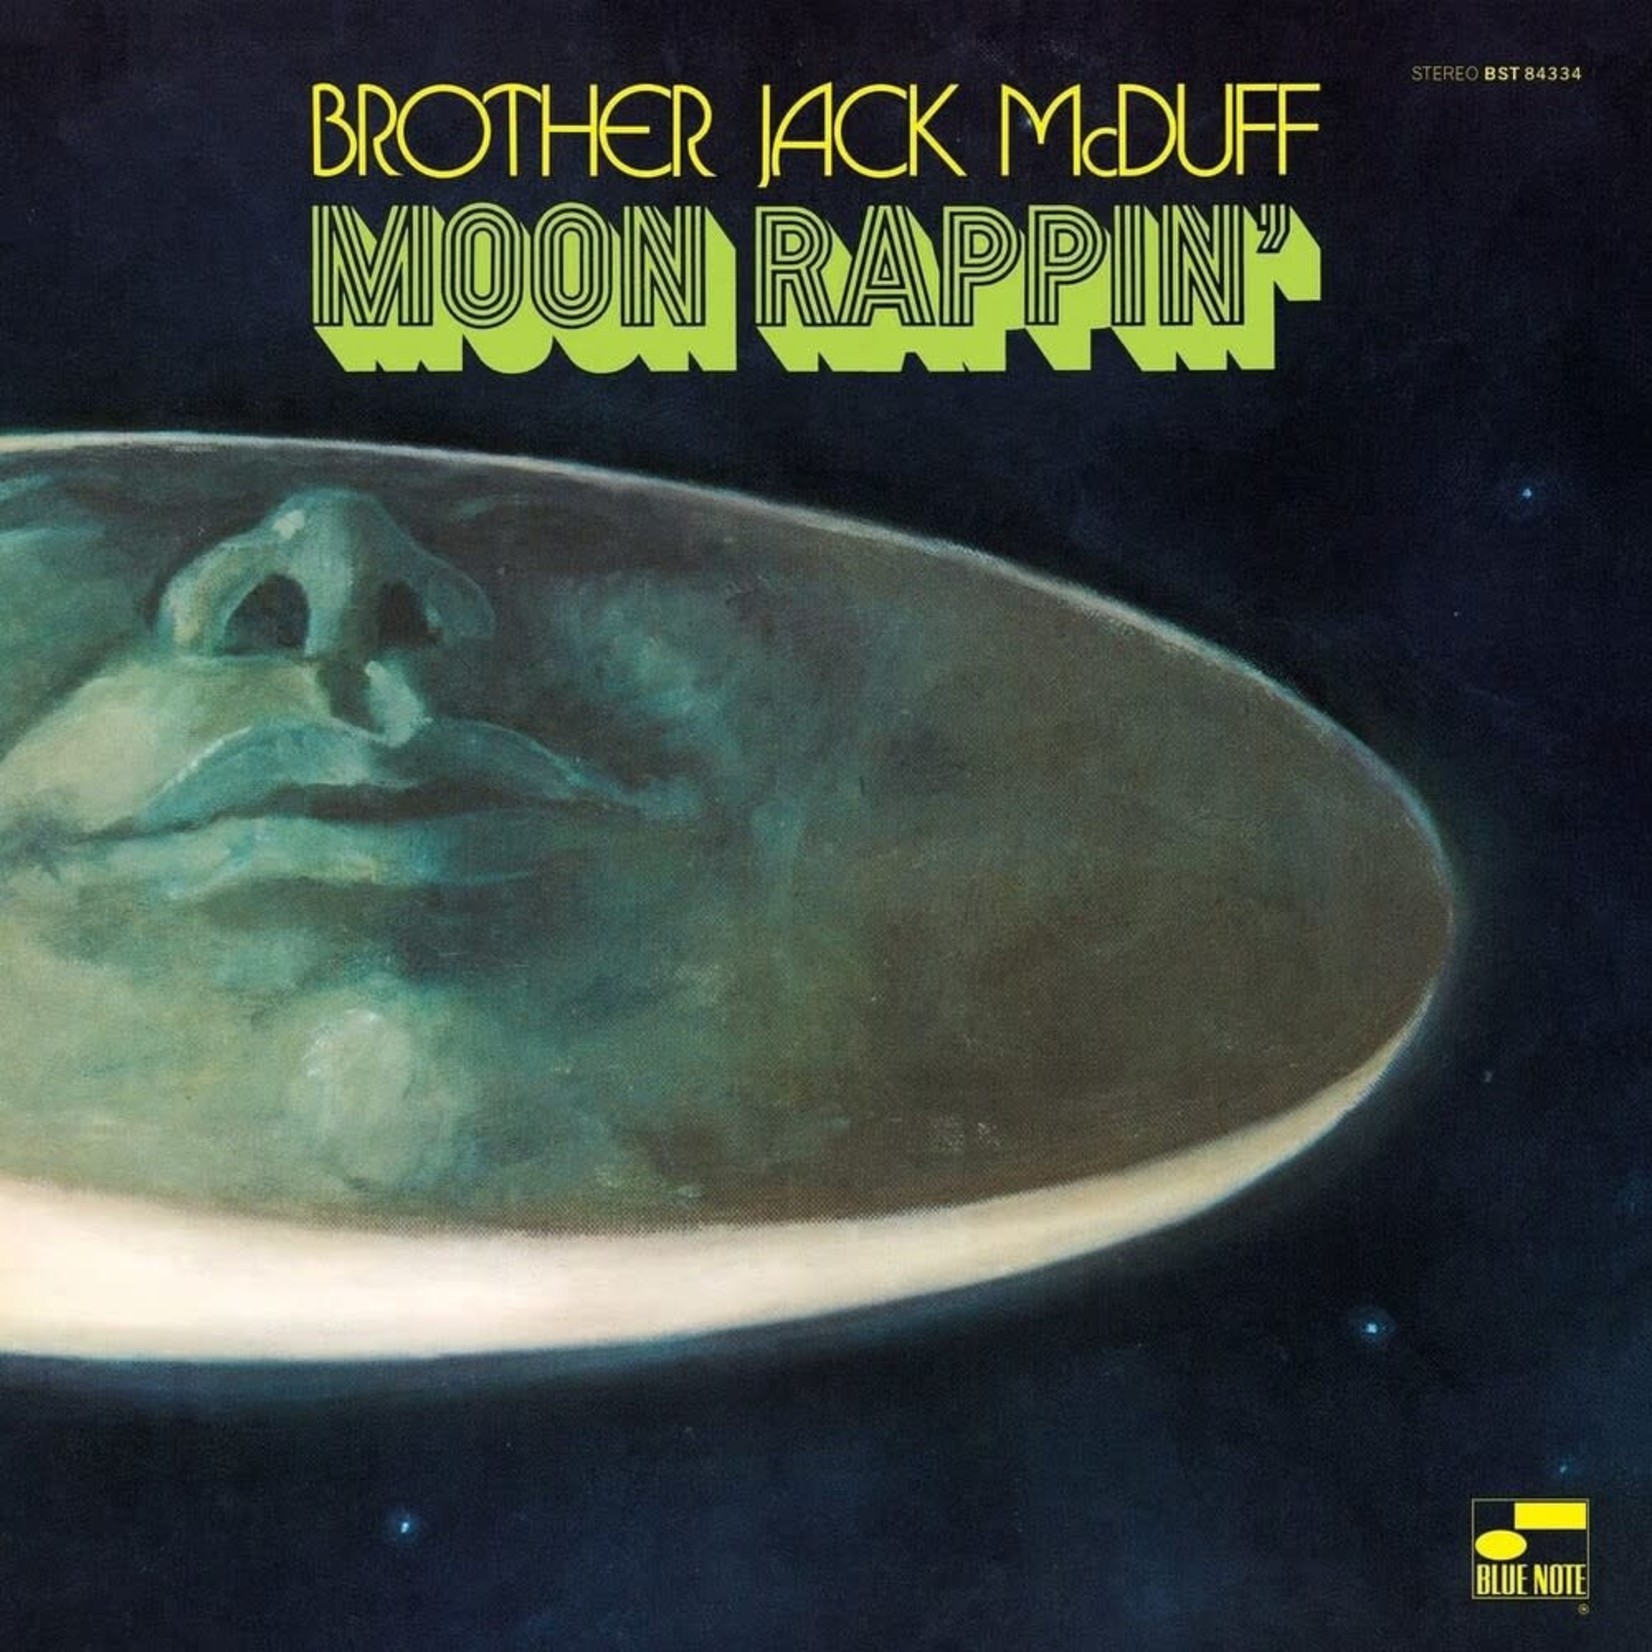 [New] Brother Jack McDuff - Moon Rappin' (Blue Note Classic Vinyl Series)